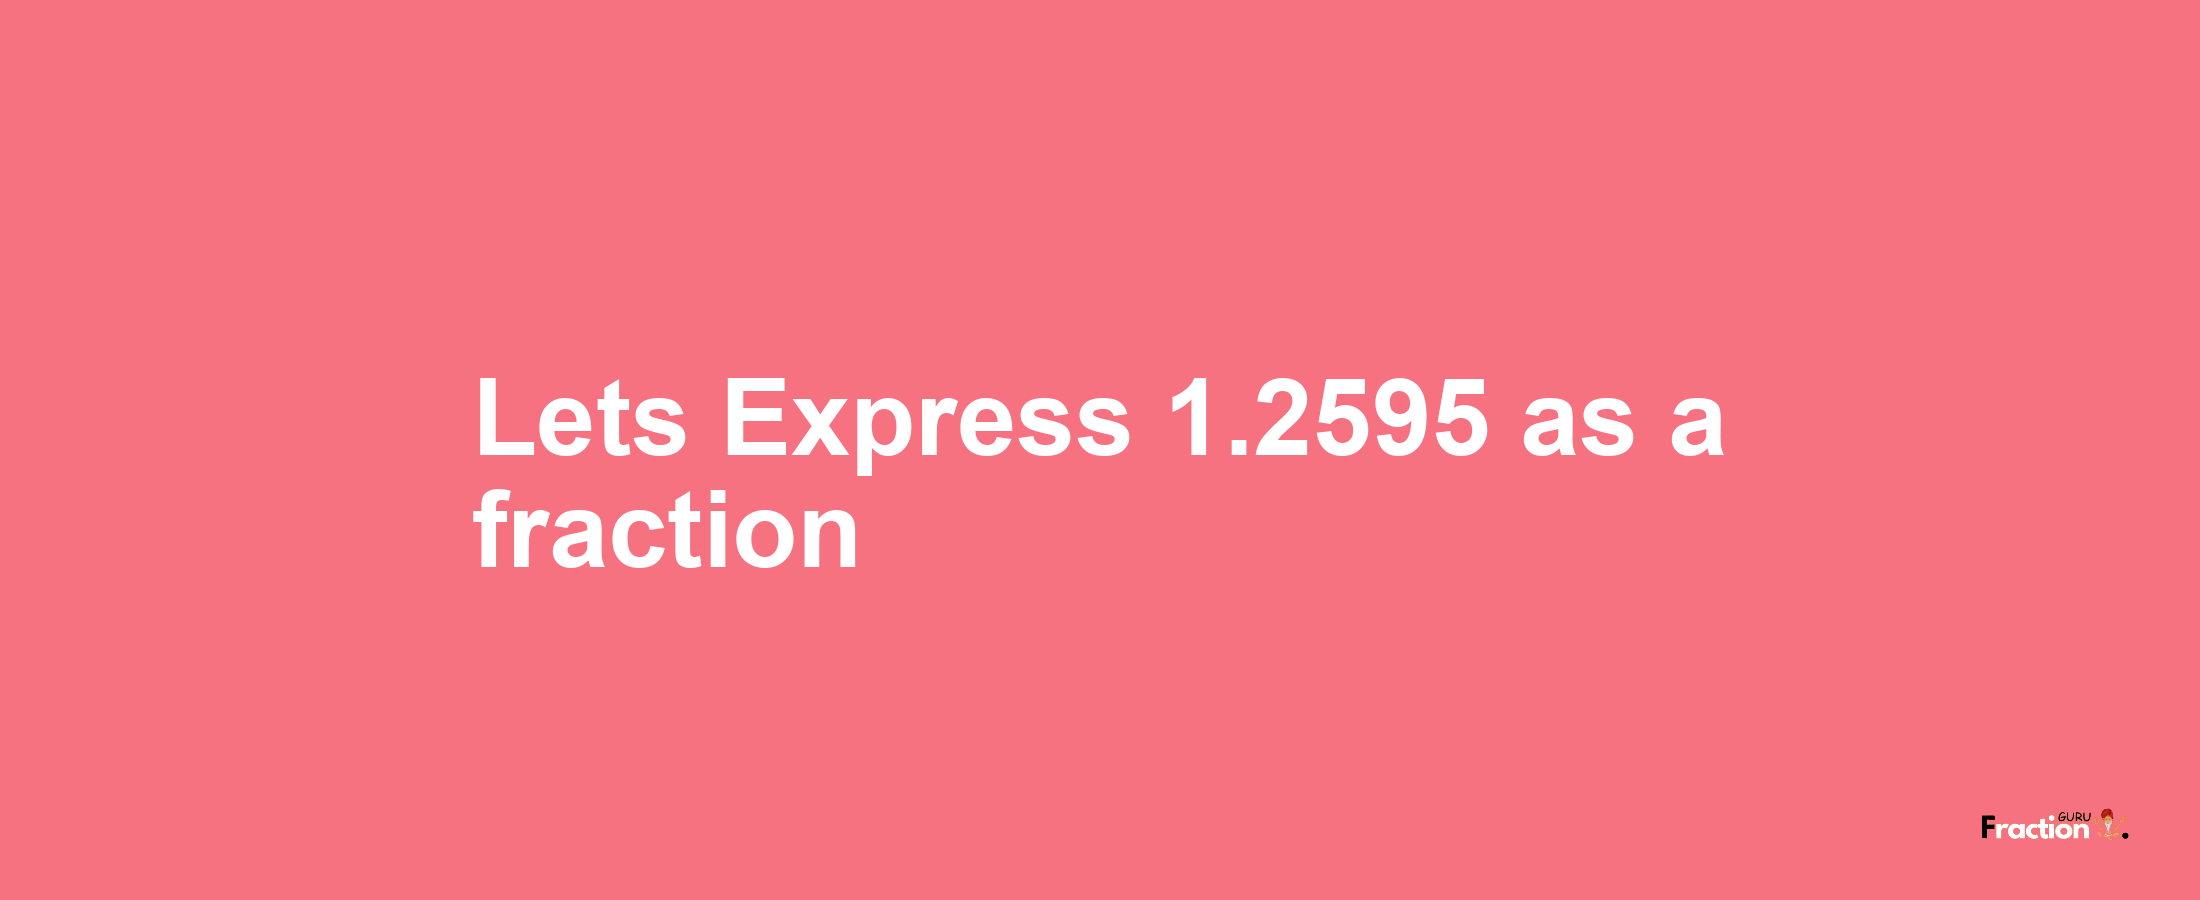 Lets Express 1.2595 as afraction